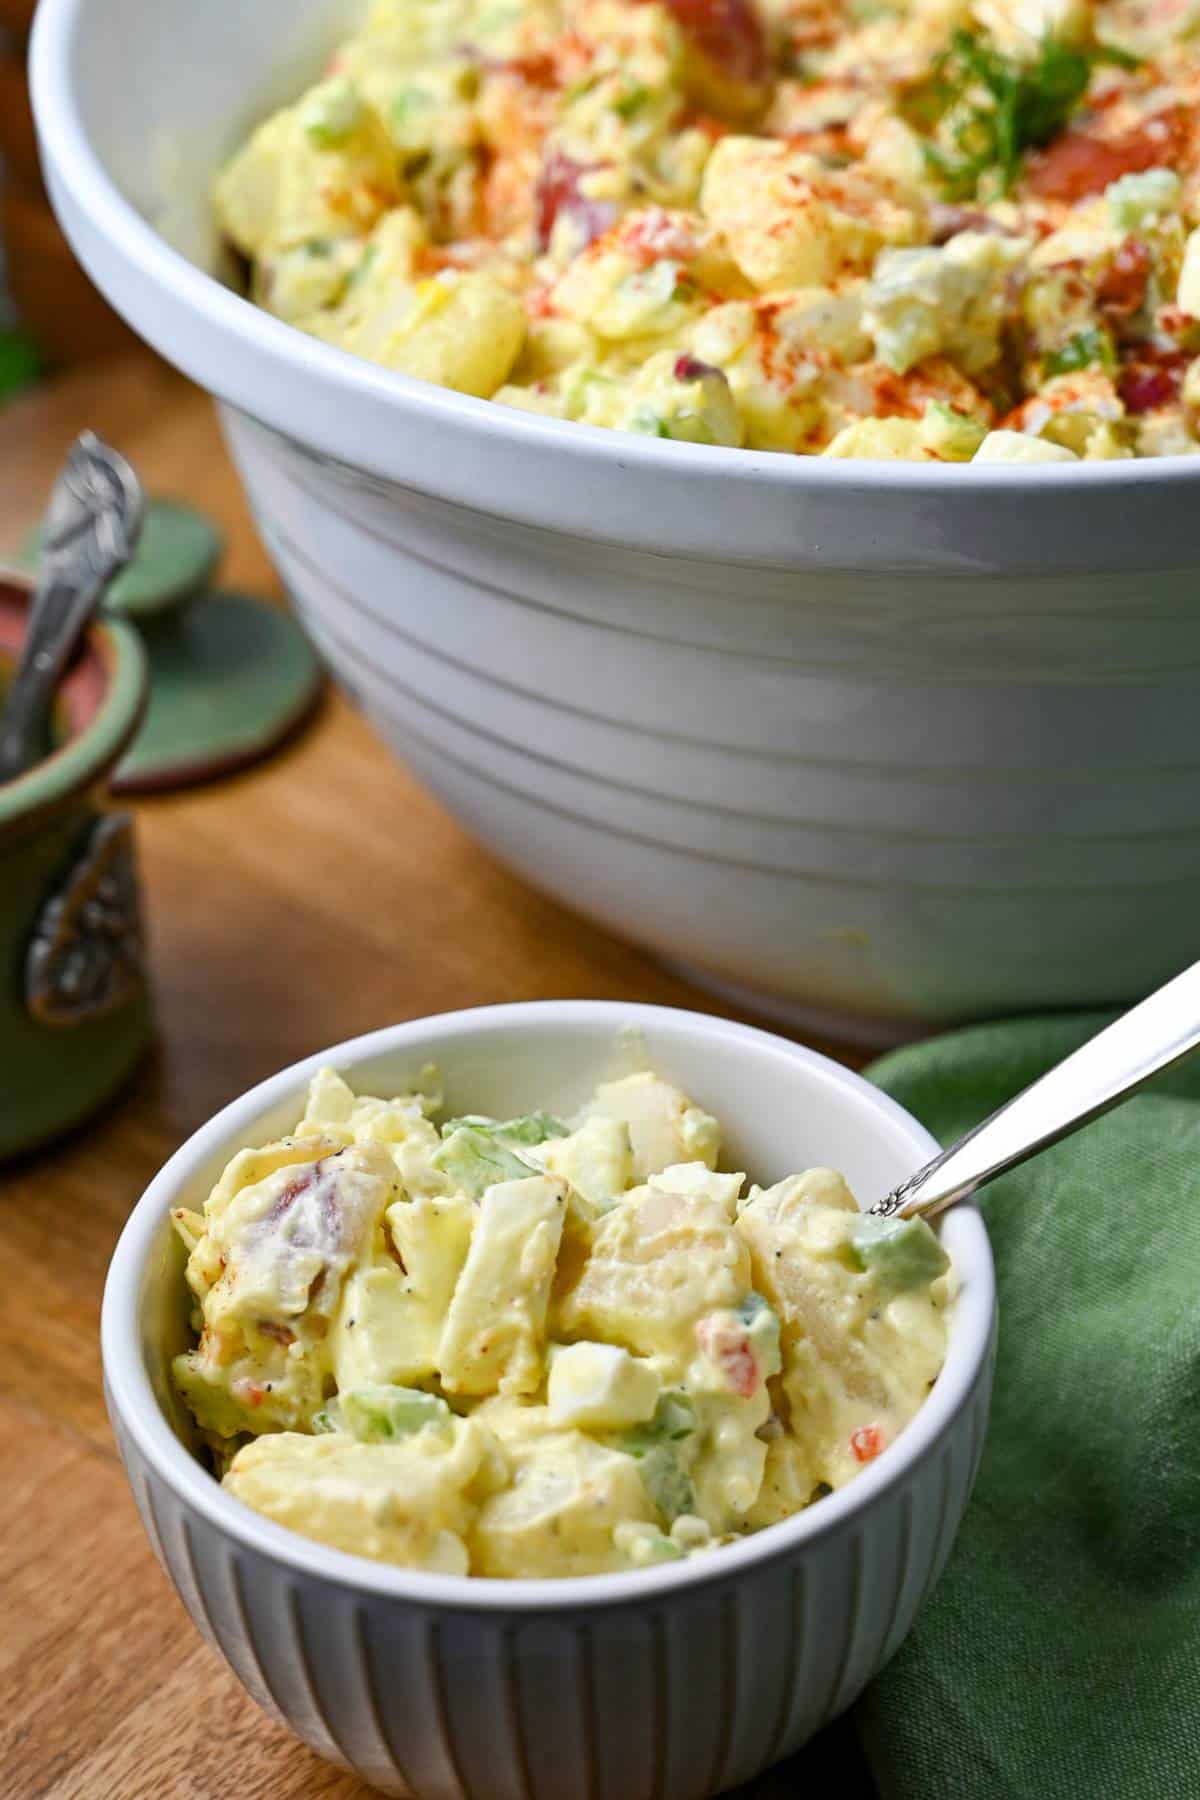 a small serving dish of red potato salad with a bowl of potato salad behind it